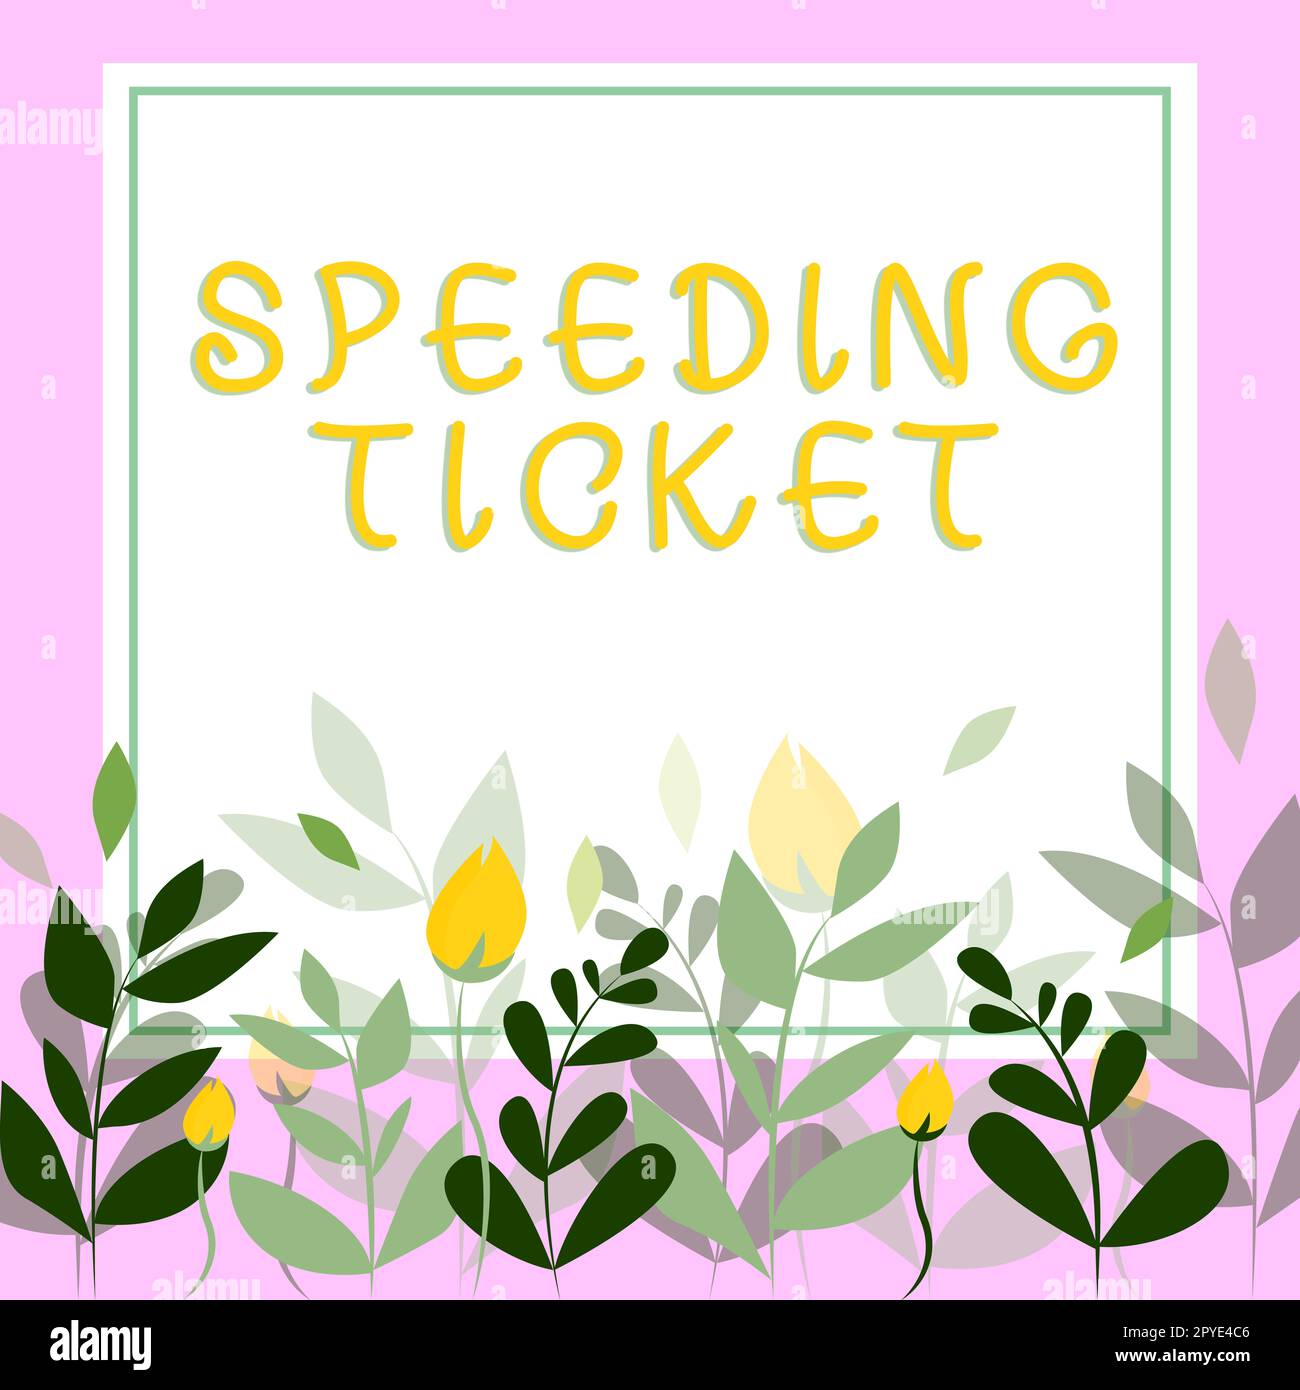 Sign displaying Speeding Ticket. Business overview psychological test for the maximum speed of performing a task Stock Photo